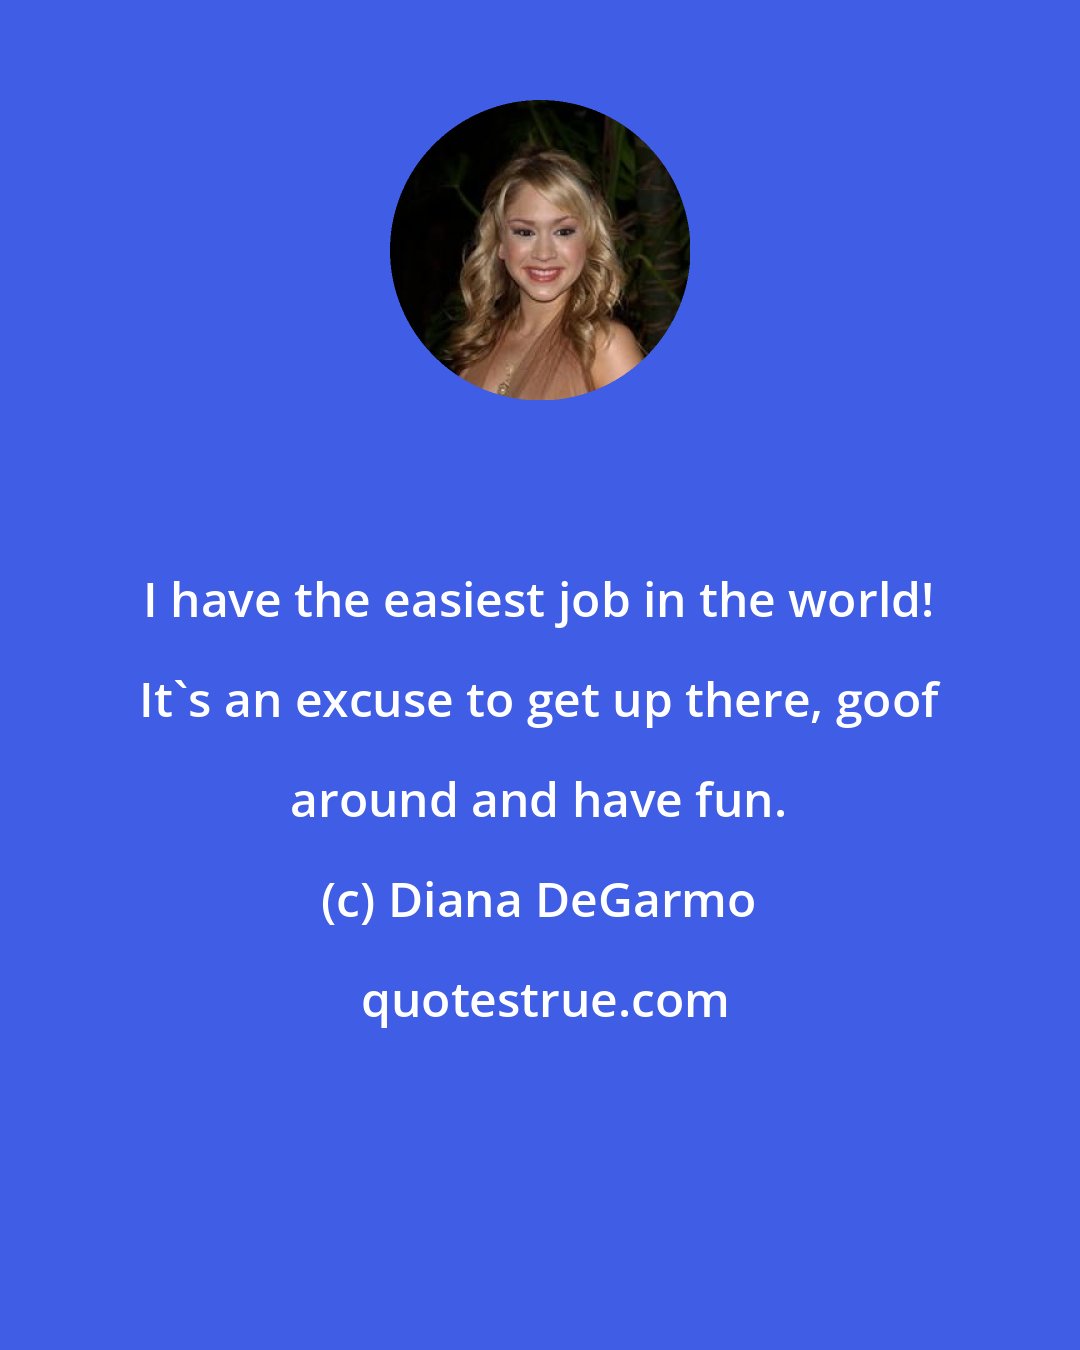 Diana DeGarmo: I have the easiest job in the world! It's an excuse to get up there, goof around and have fun.